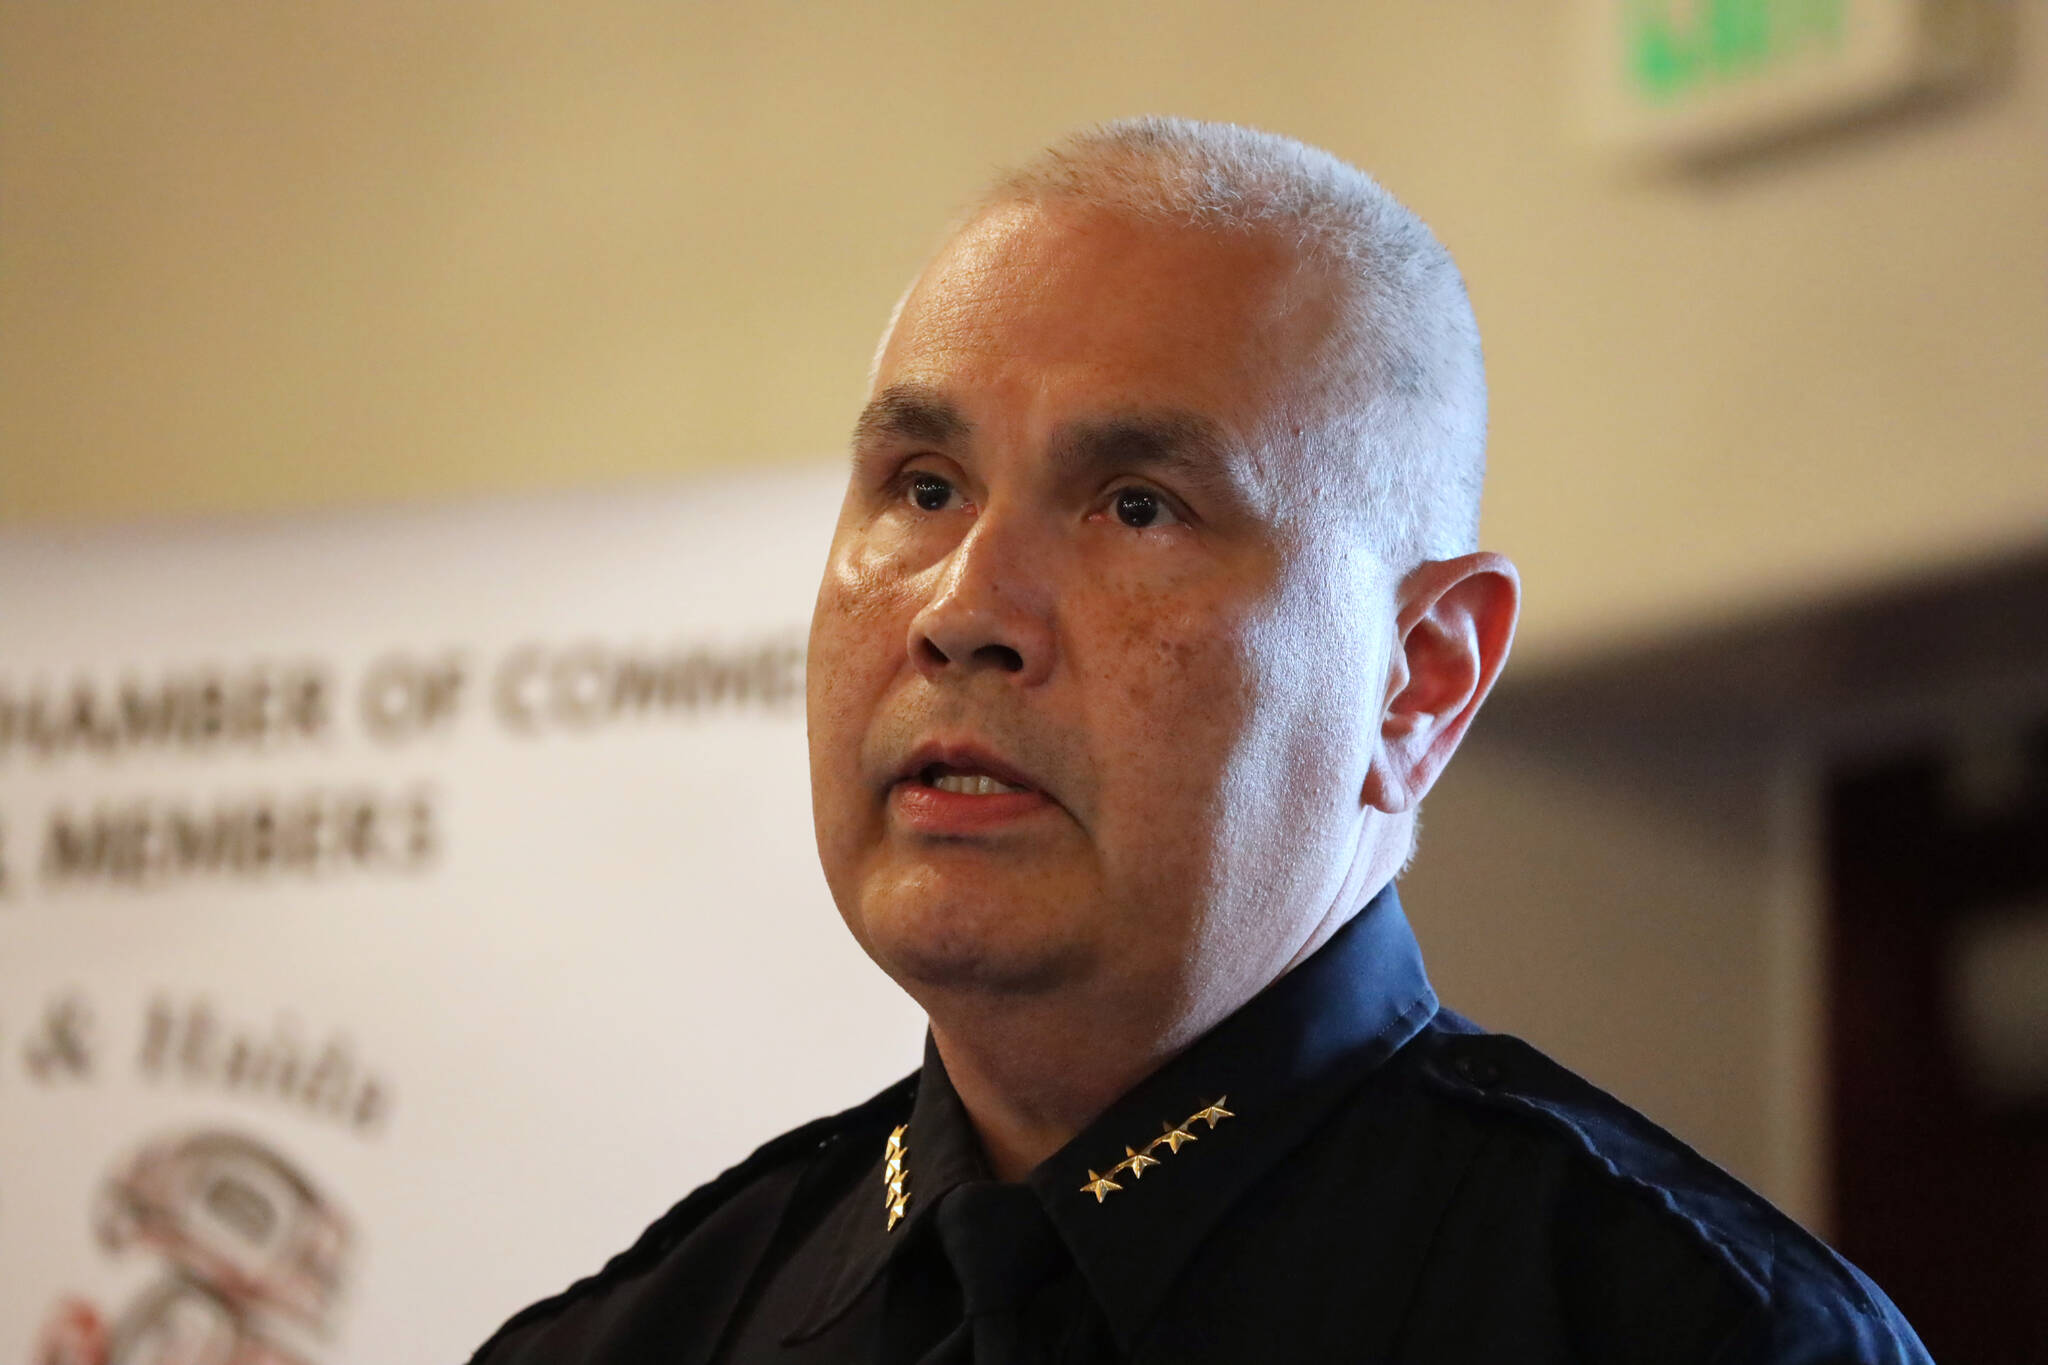 Juneau Chief of Police Ed Mercer speaks to the Greater Juneau Chamber of Commerce Thursday afternoon ahead of his retirement slated for Monday, July 31. (Clarise Larson / Juneau Empire)